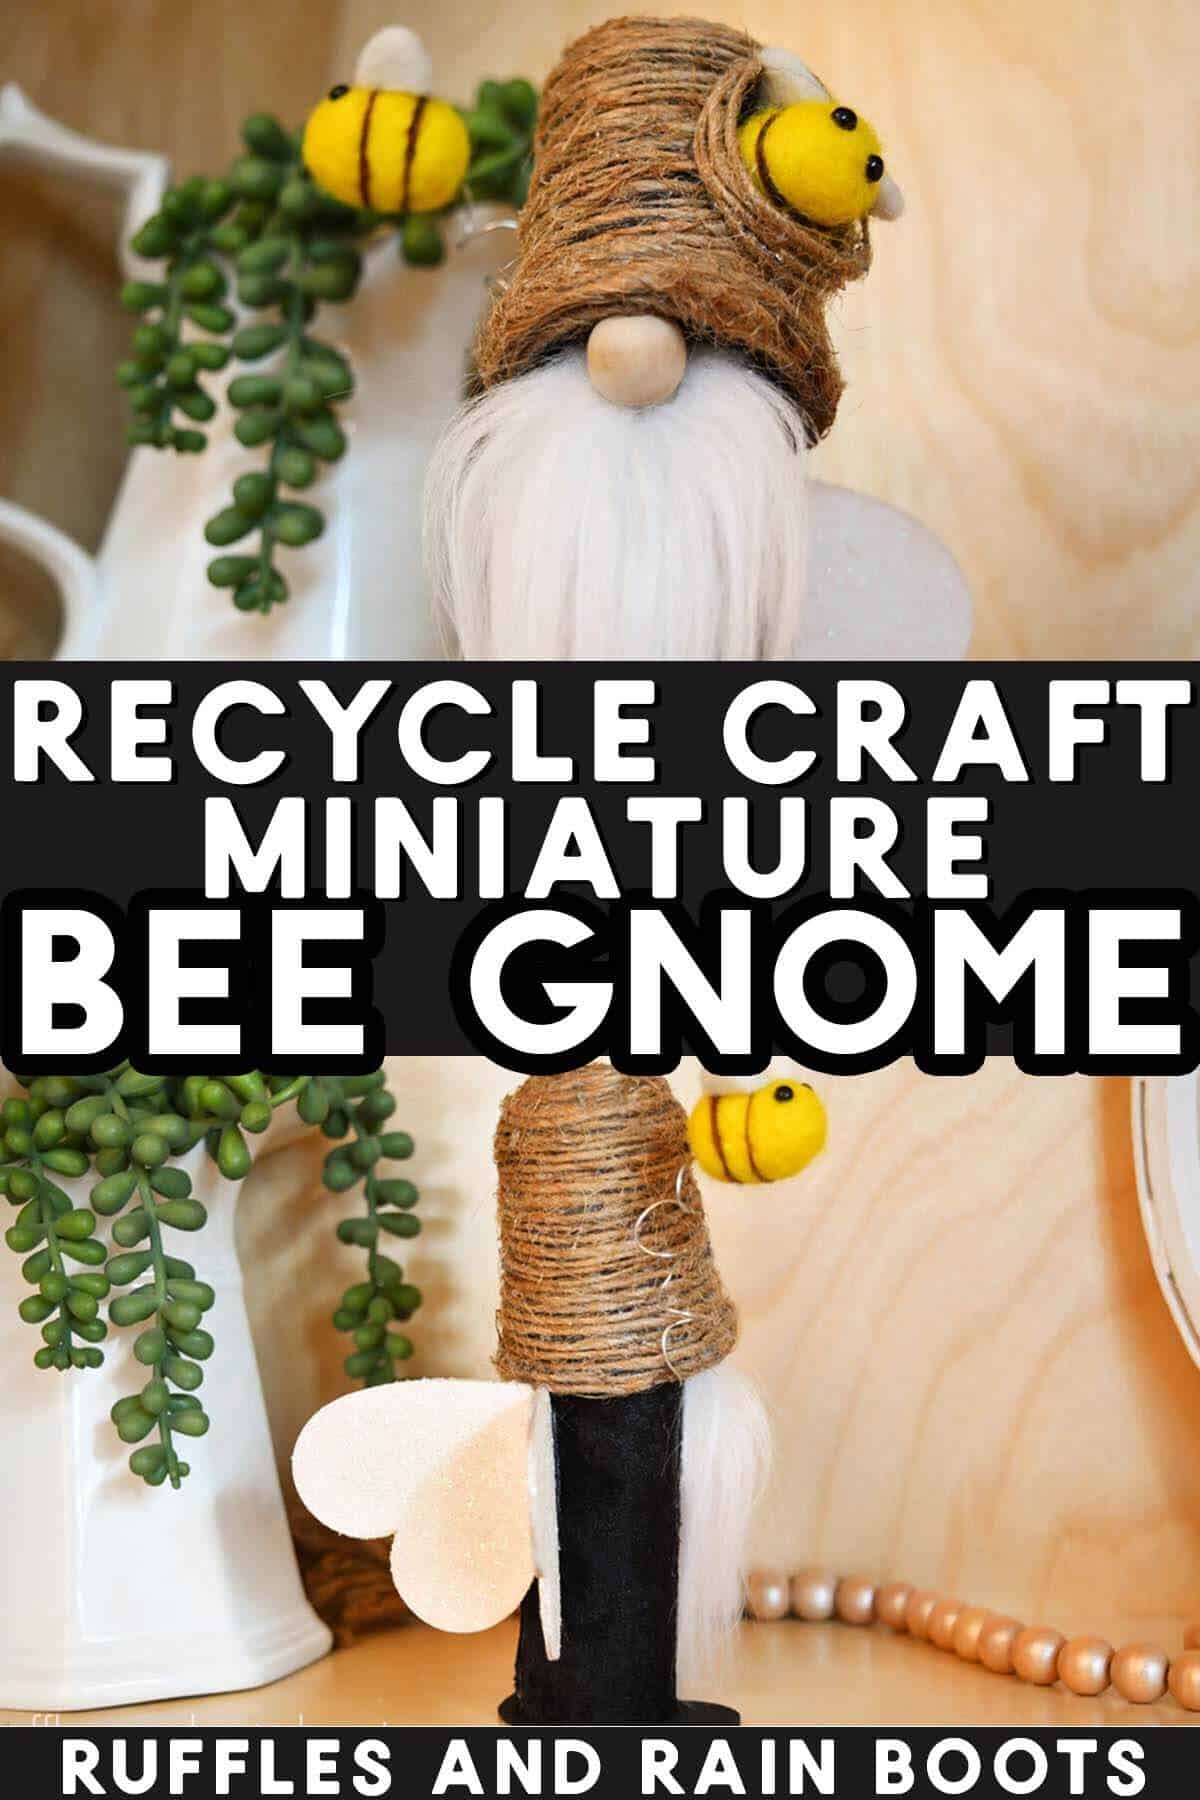 Vertical stacked image showing the front and back of a beehive gnome made with a beehive hat, white faux fur, wings, and a body from a paper roll with text which reads recycle craft miniature bee gnome.